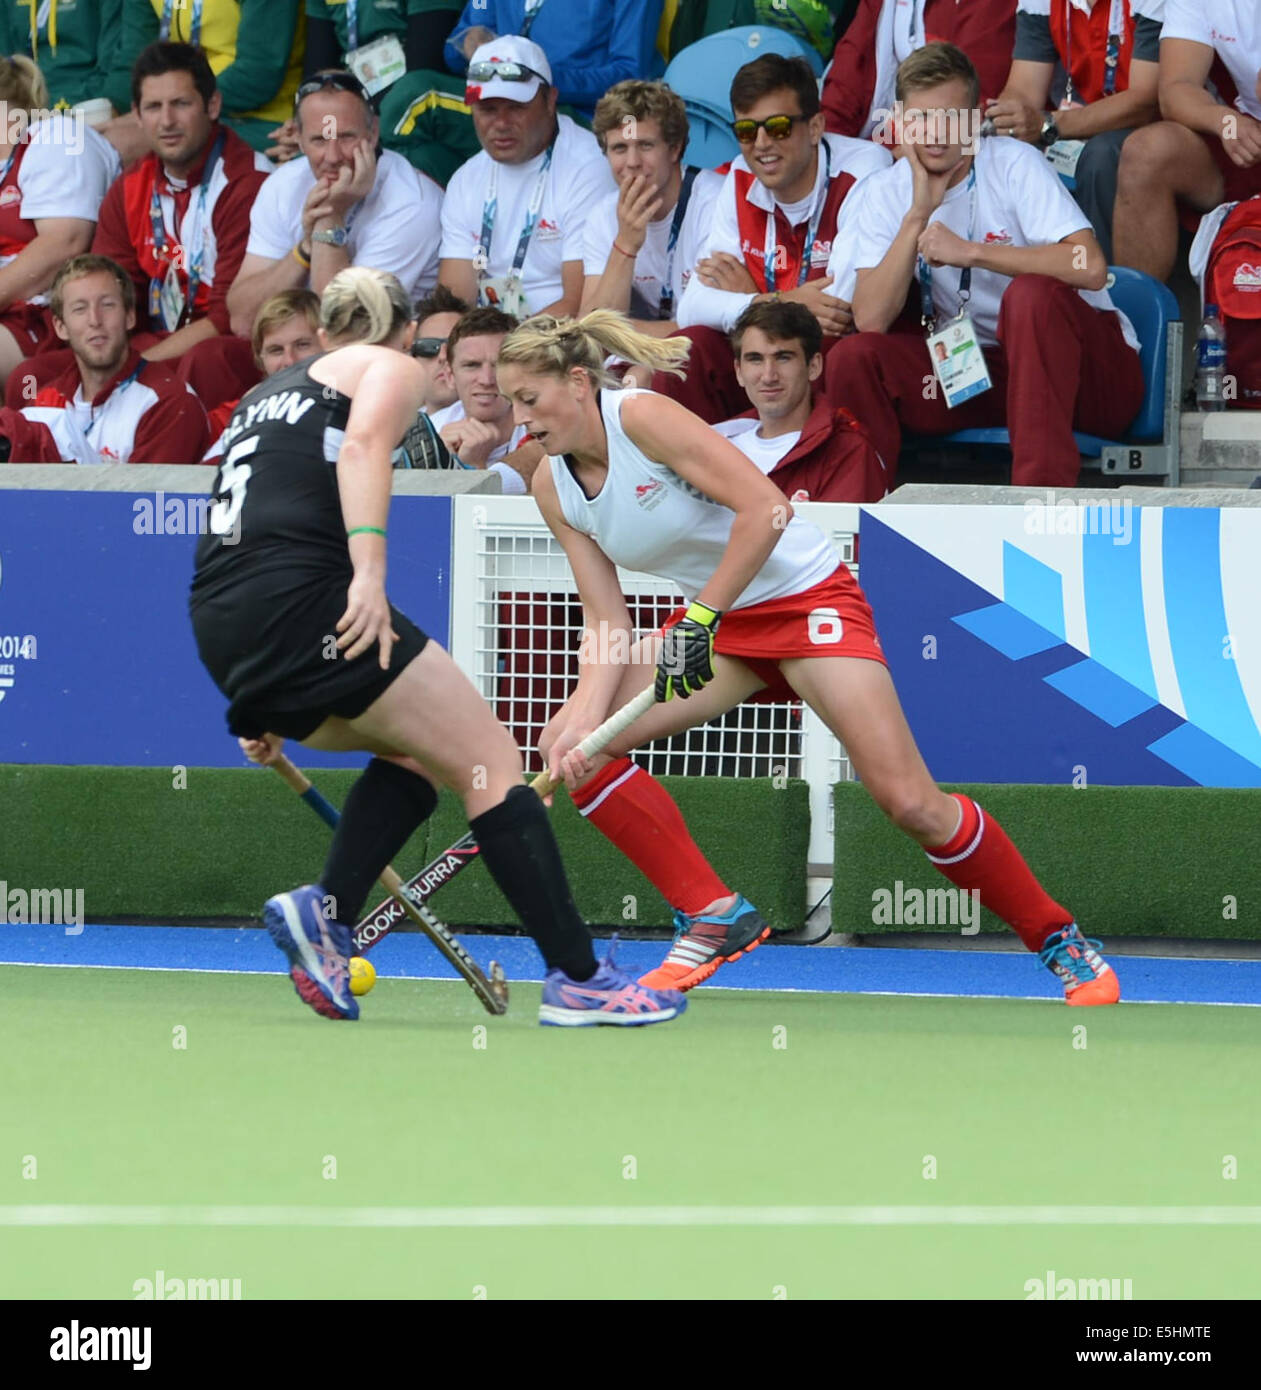 Glasgow, Scotland, UK. 1st Aug, 2014. England's Zoe Shipperley competes for England in their Commonwealth Games's semi-final against New Zealand in the Women's hockey competition on August 1st, 2014 at the National Hockey Stadium in Glasgow, Sco Credit:  Martin Bateman/Alamy Live News Stock Photo